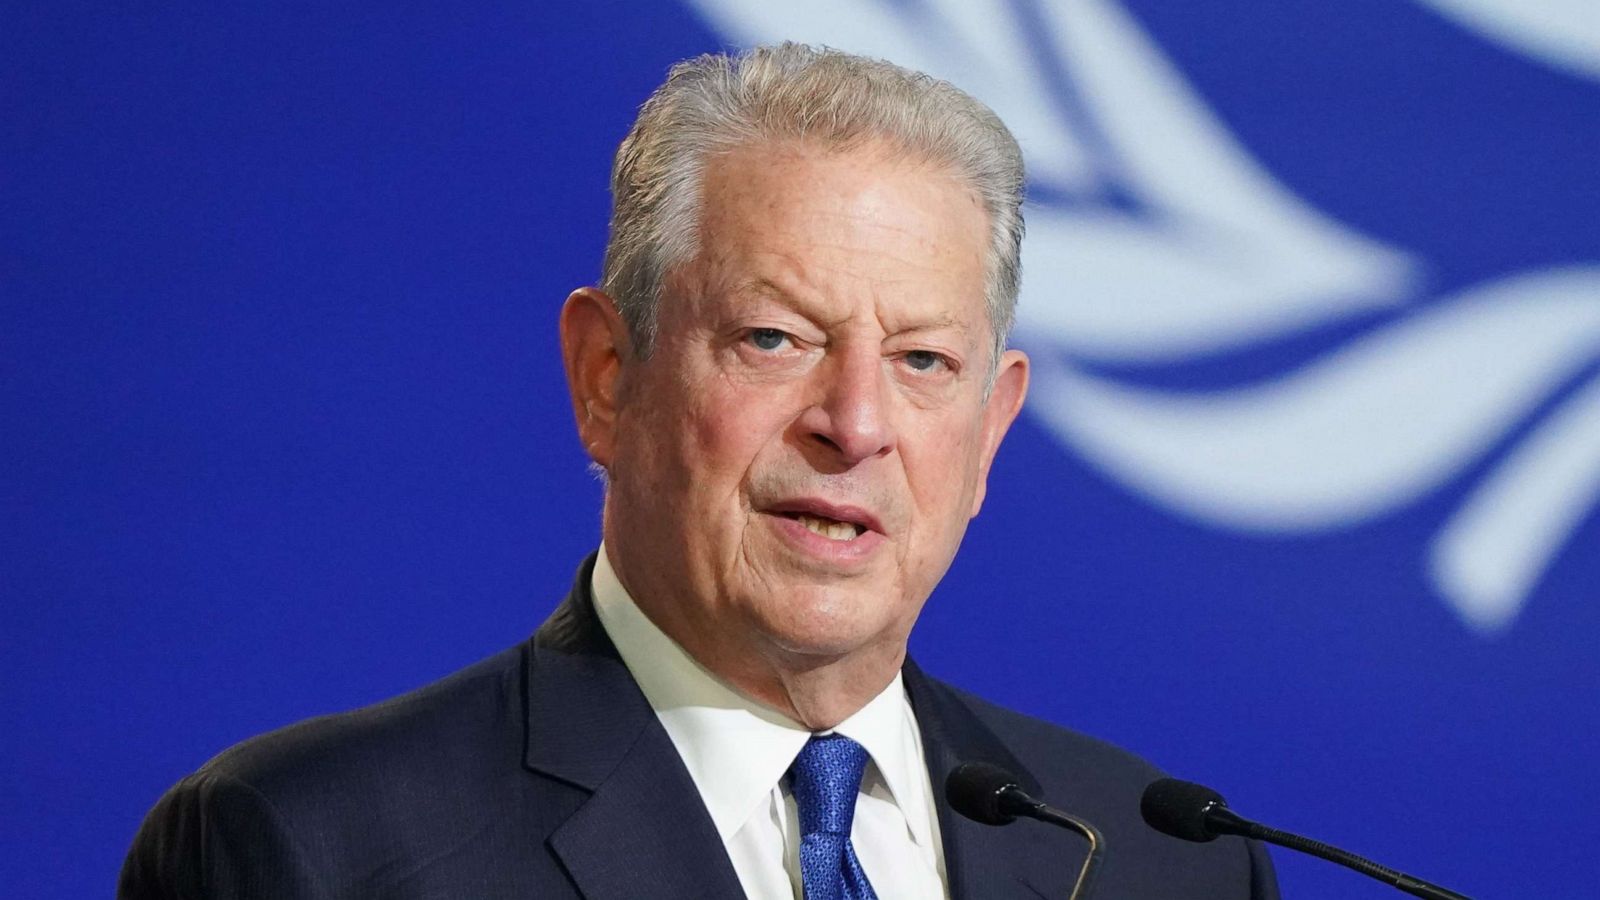 Al Gore warns severe weather will 'get a lot worse' without climate action  - ABC News